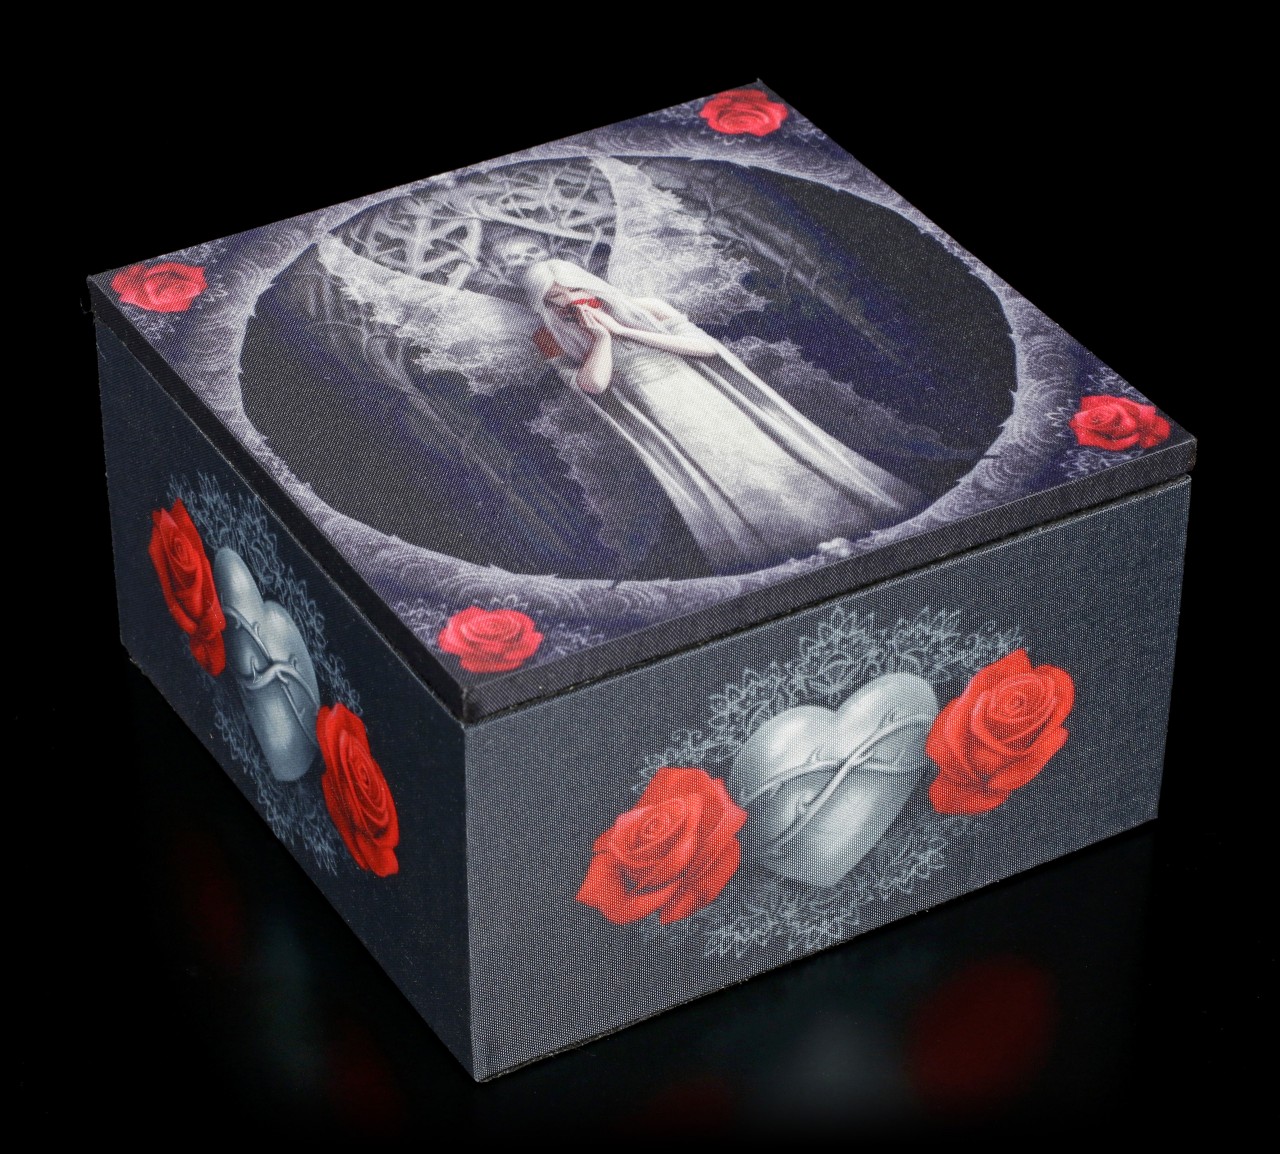 Mirror Box with Gothic Angel - Only Love Remains